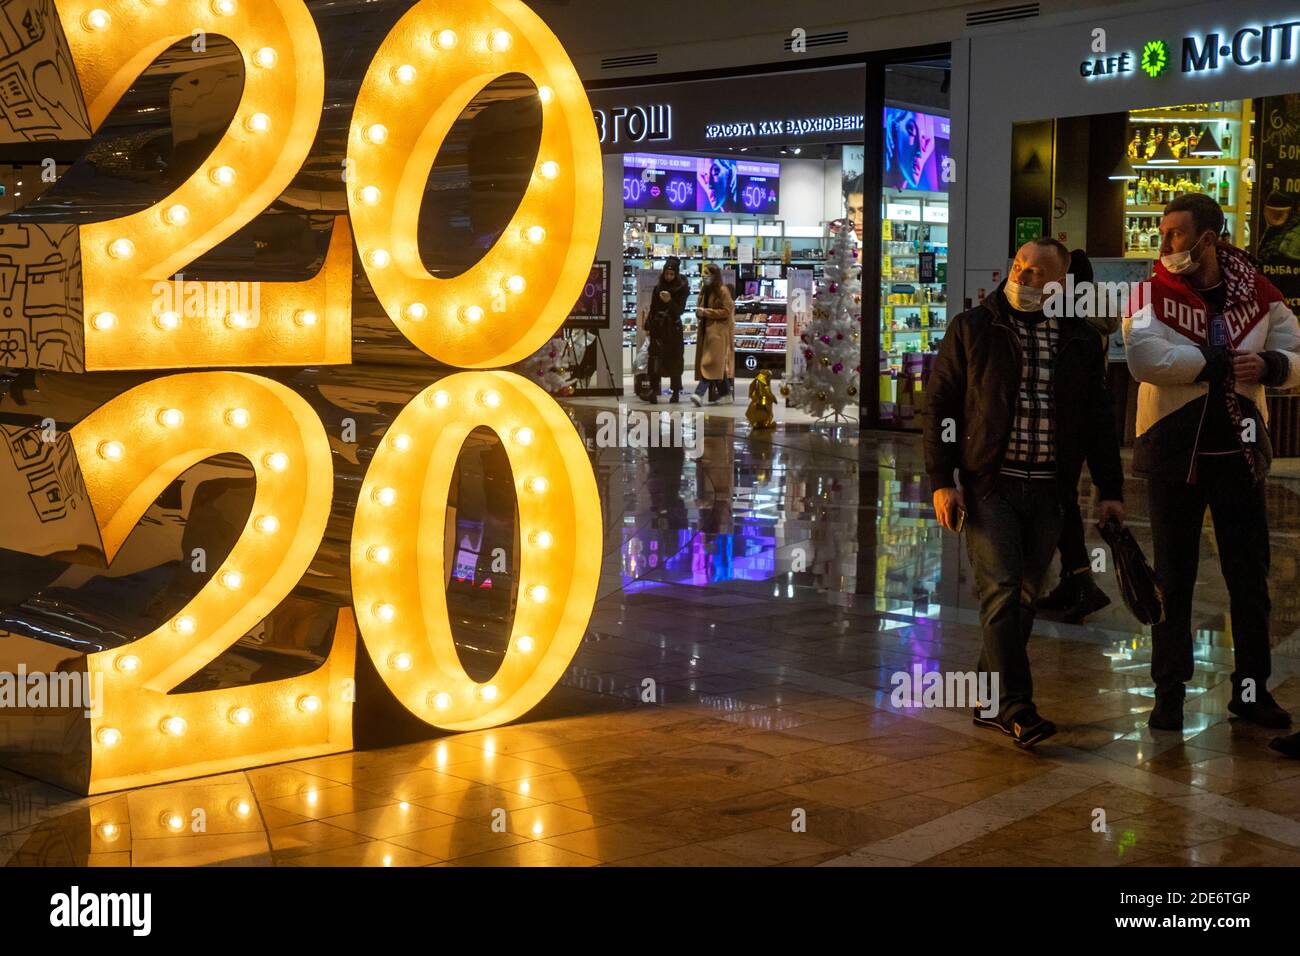 Moscow, Russia. 29th of November, 2020 An installation in the form of numbers of the year "2020" is installed in the center of the AFIMALL City shopping center in Moscow, Russia Stock Photo